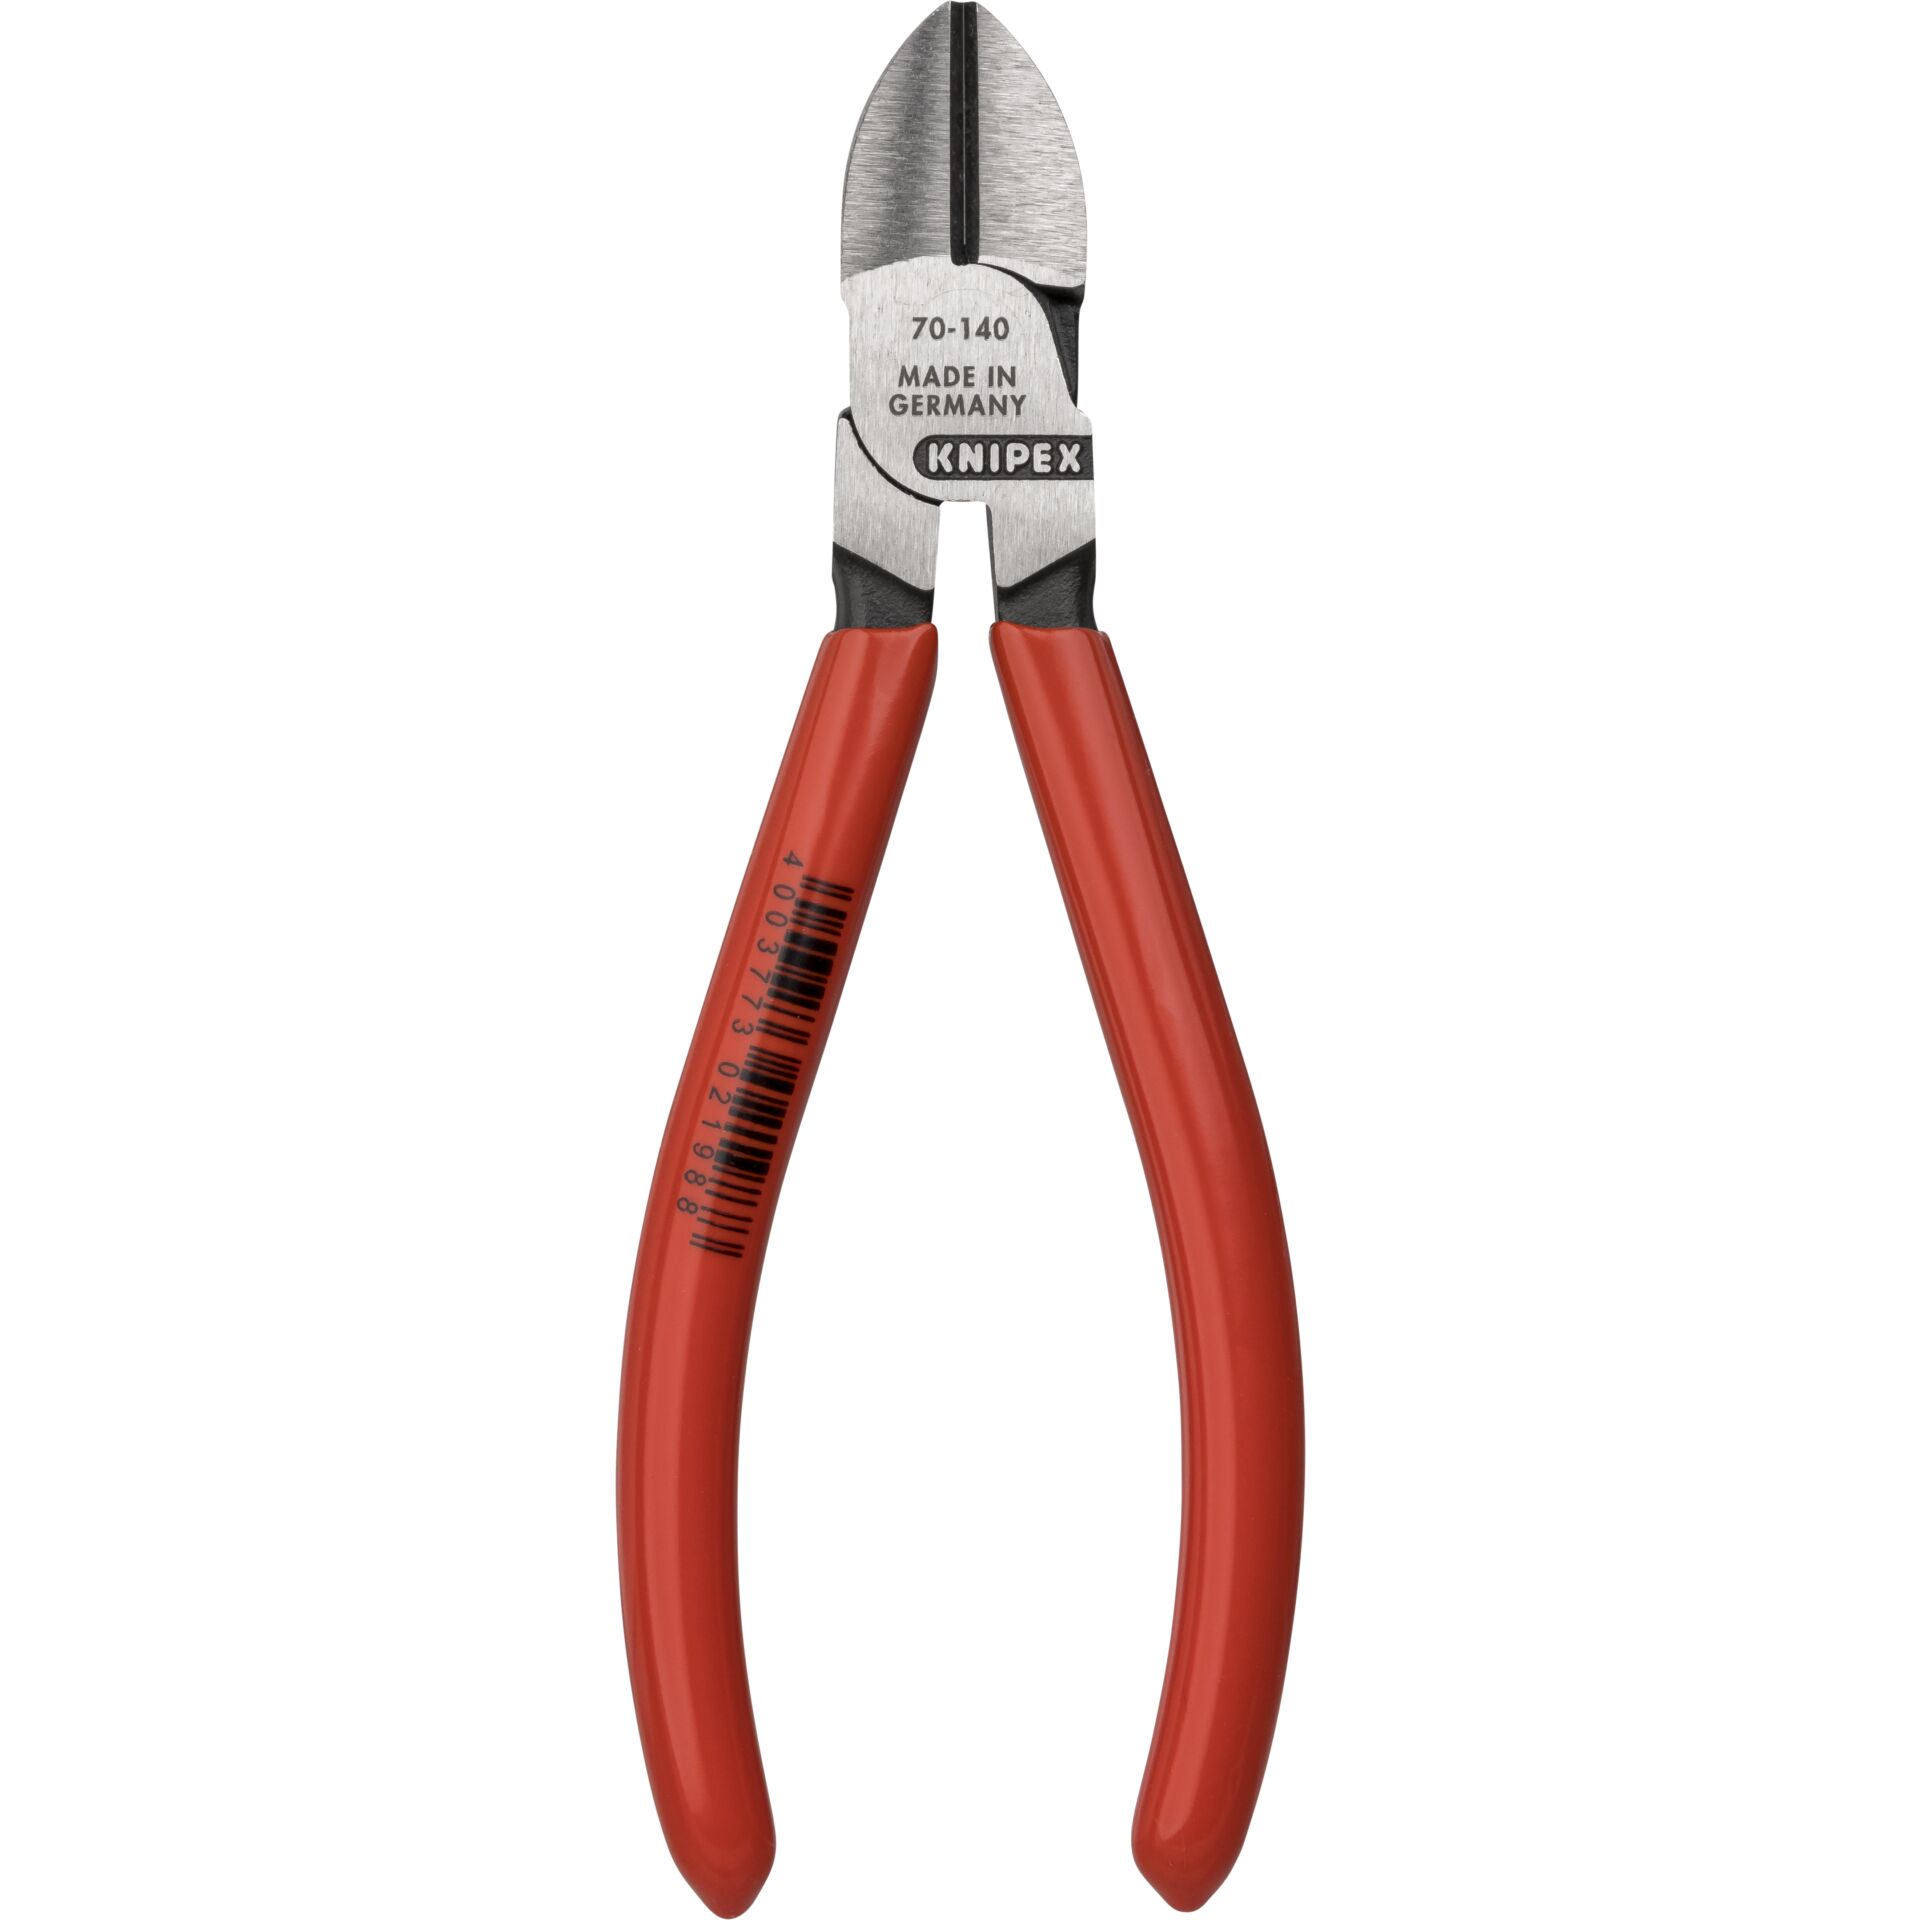 KNIPEX tronchese laterale